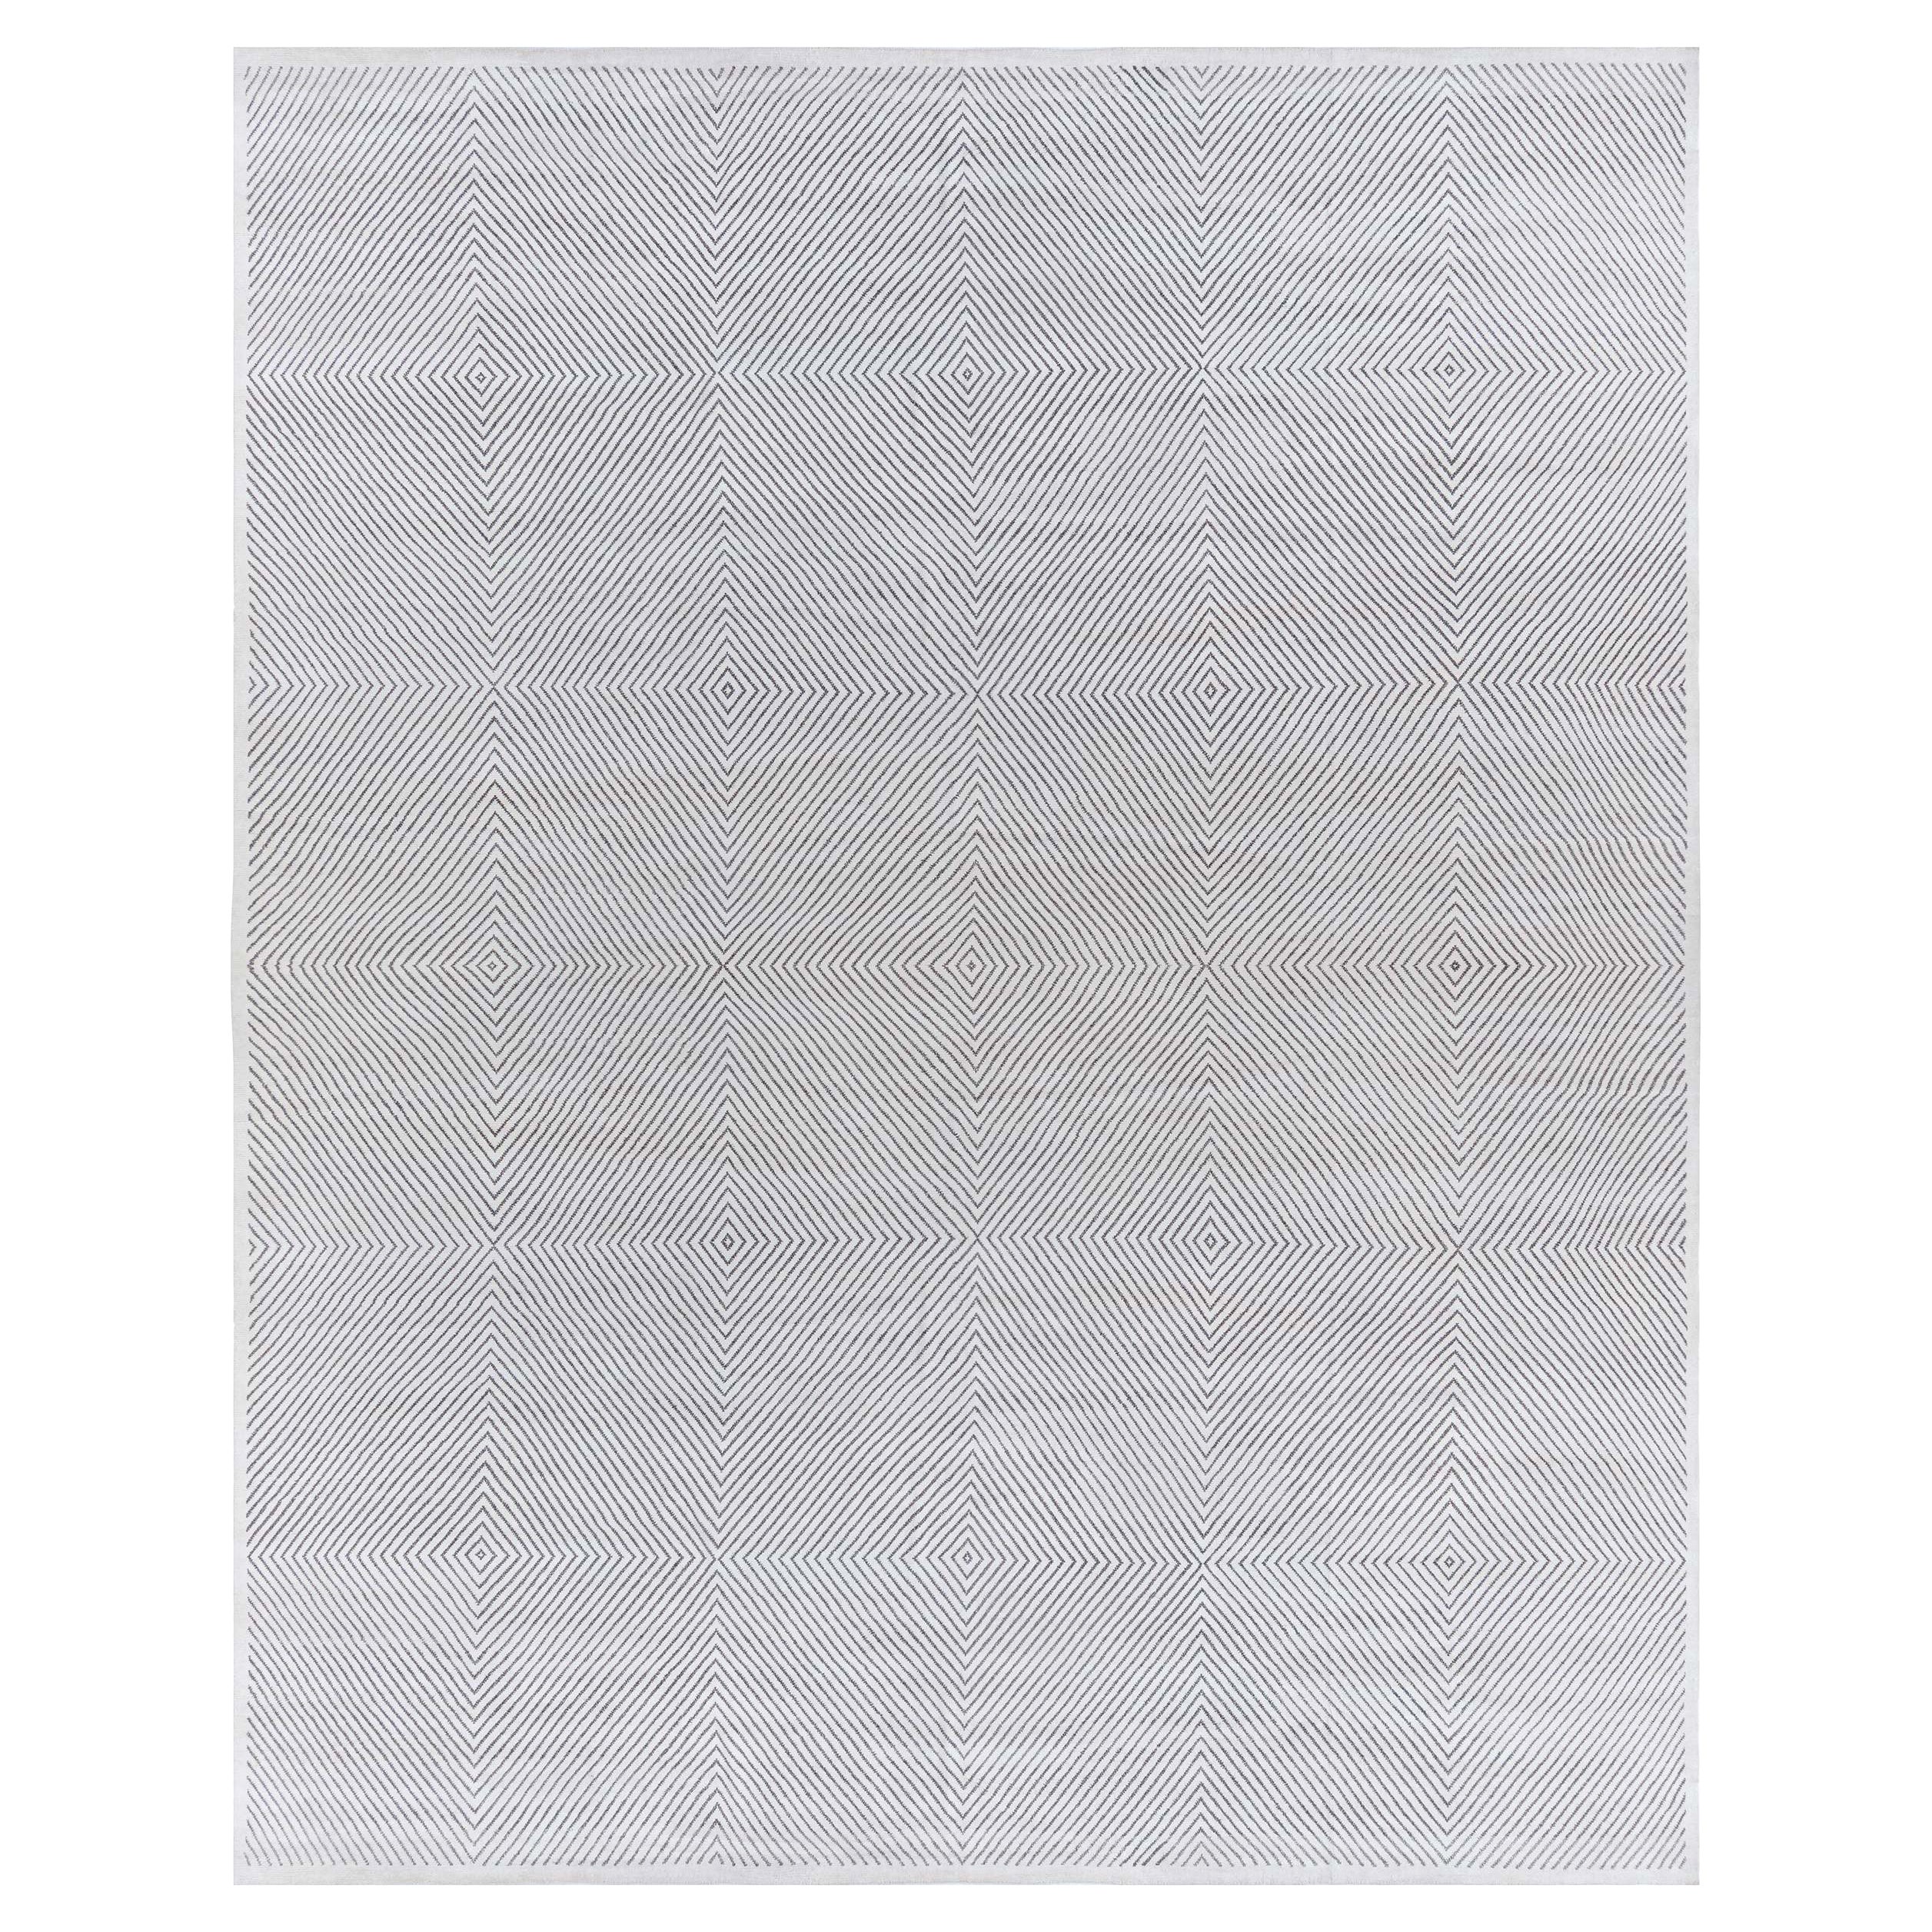 Contemporary Hand Knotted Wool Rug by Doris Leslie Blau